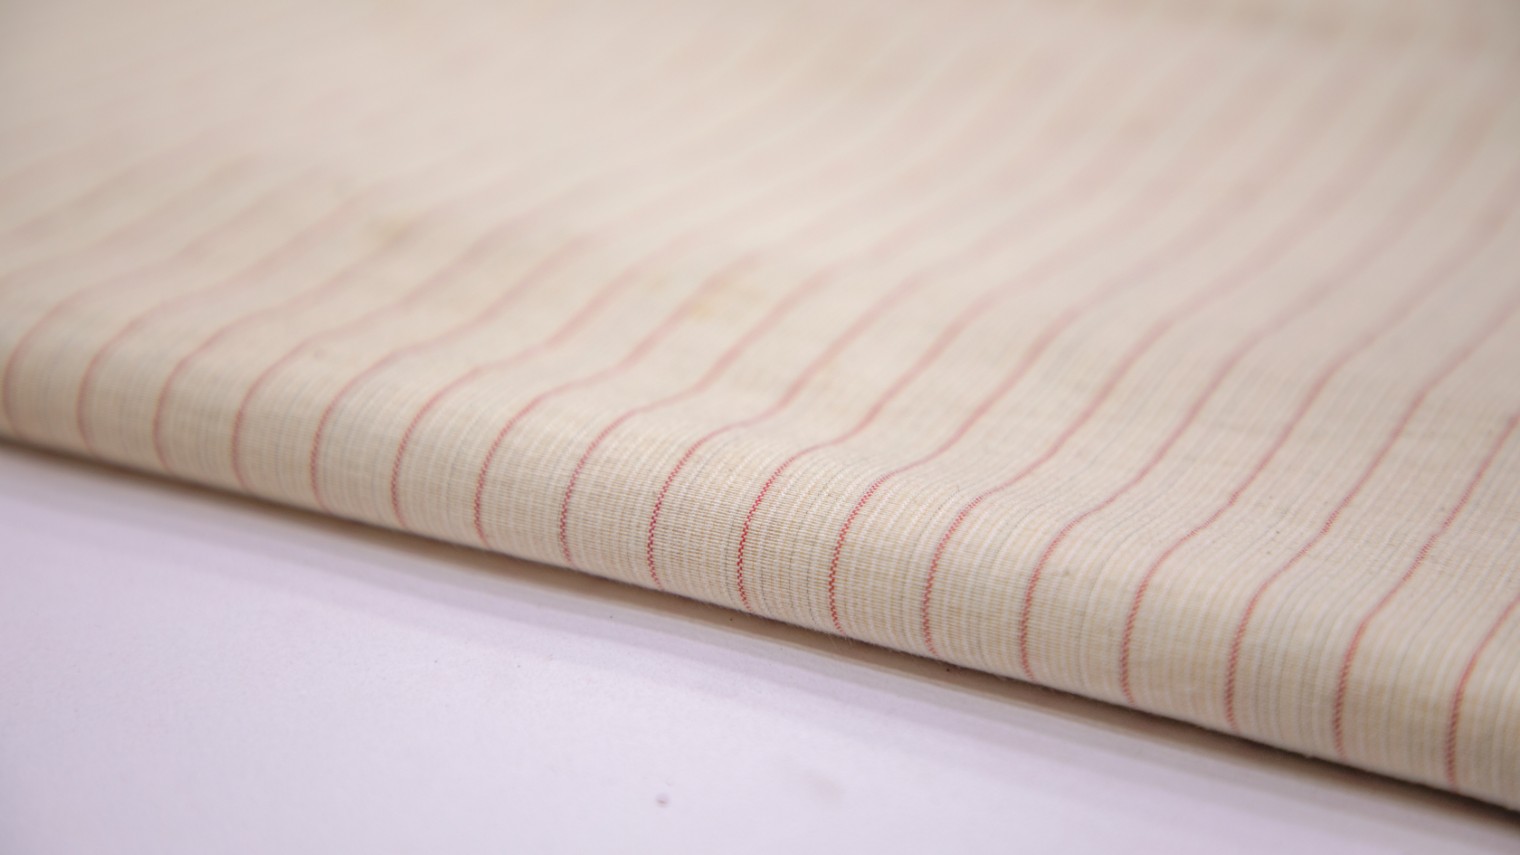 OFF WHITE COLOR SOUTH COTTON HANDLOOM PINK THIN STRIPES WEAVE FABRIC - 4249